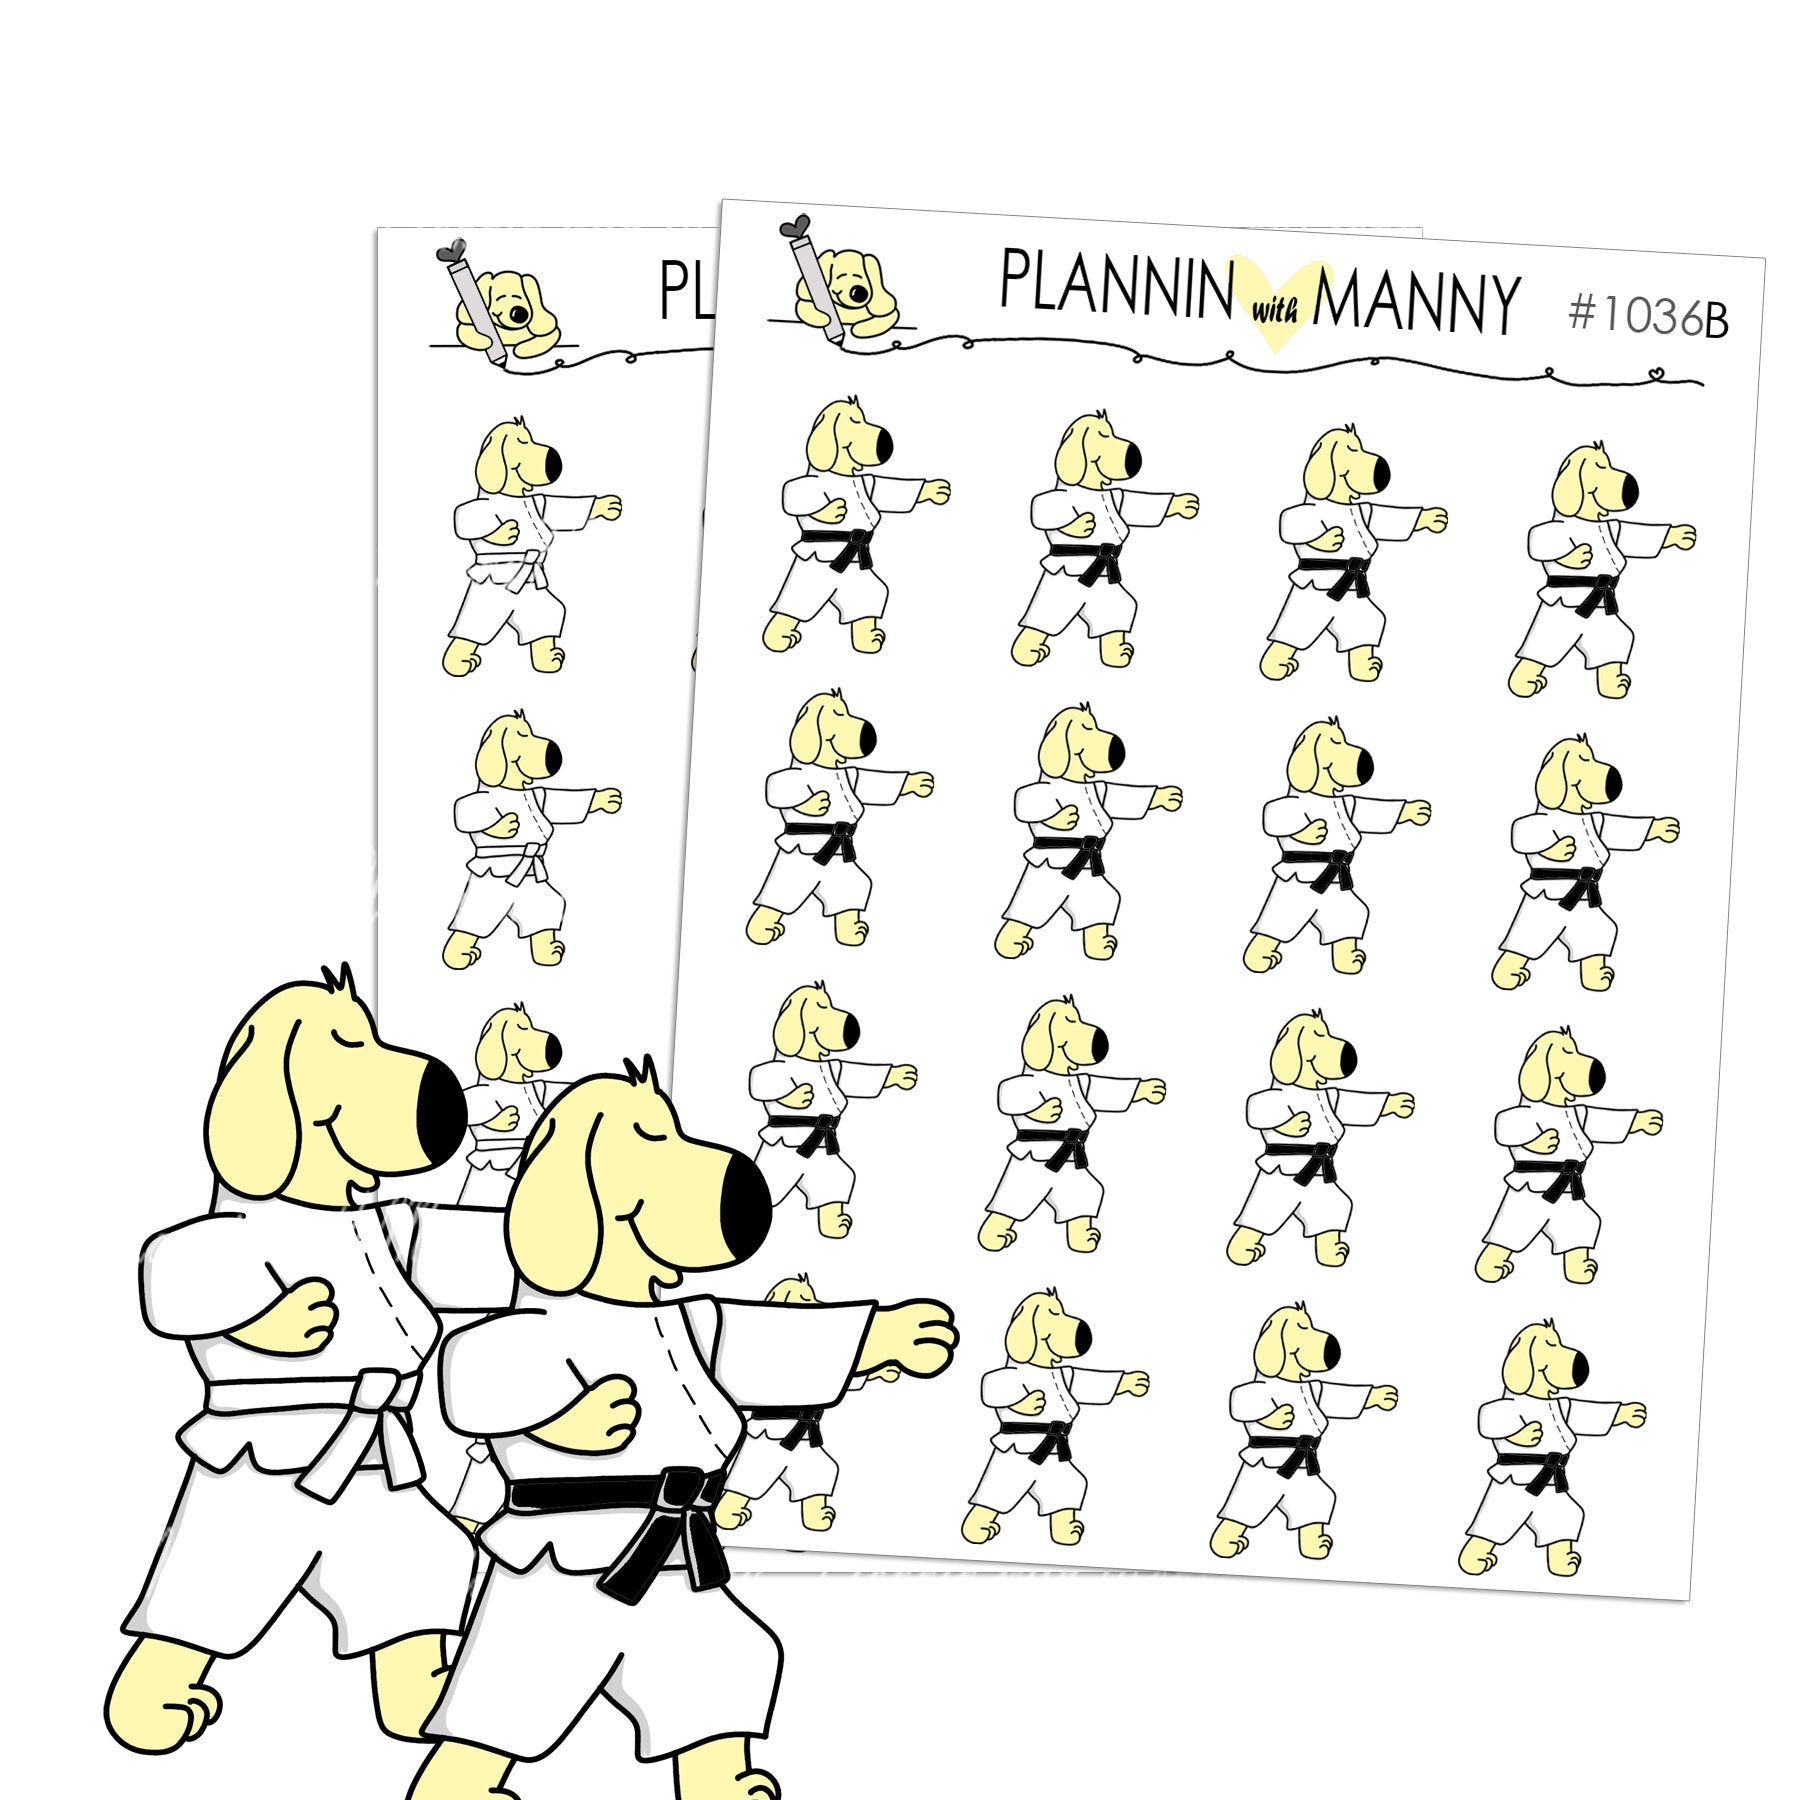 1036 KARATE MARTIAL ARTS MANNY Planner Stickers